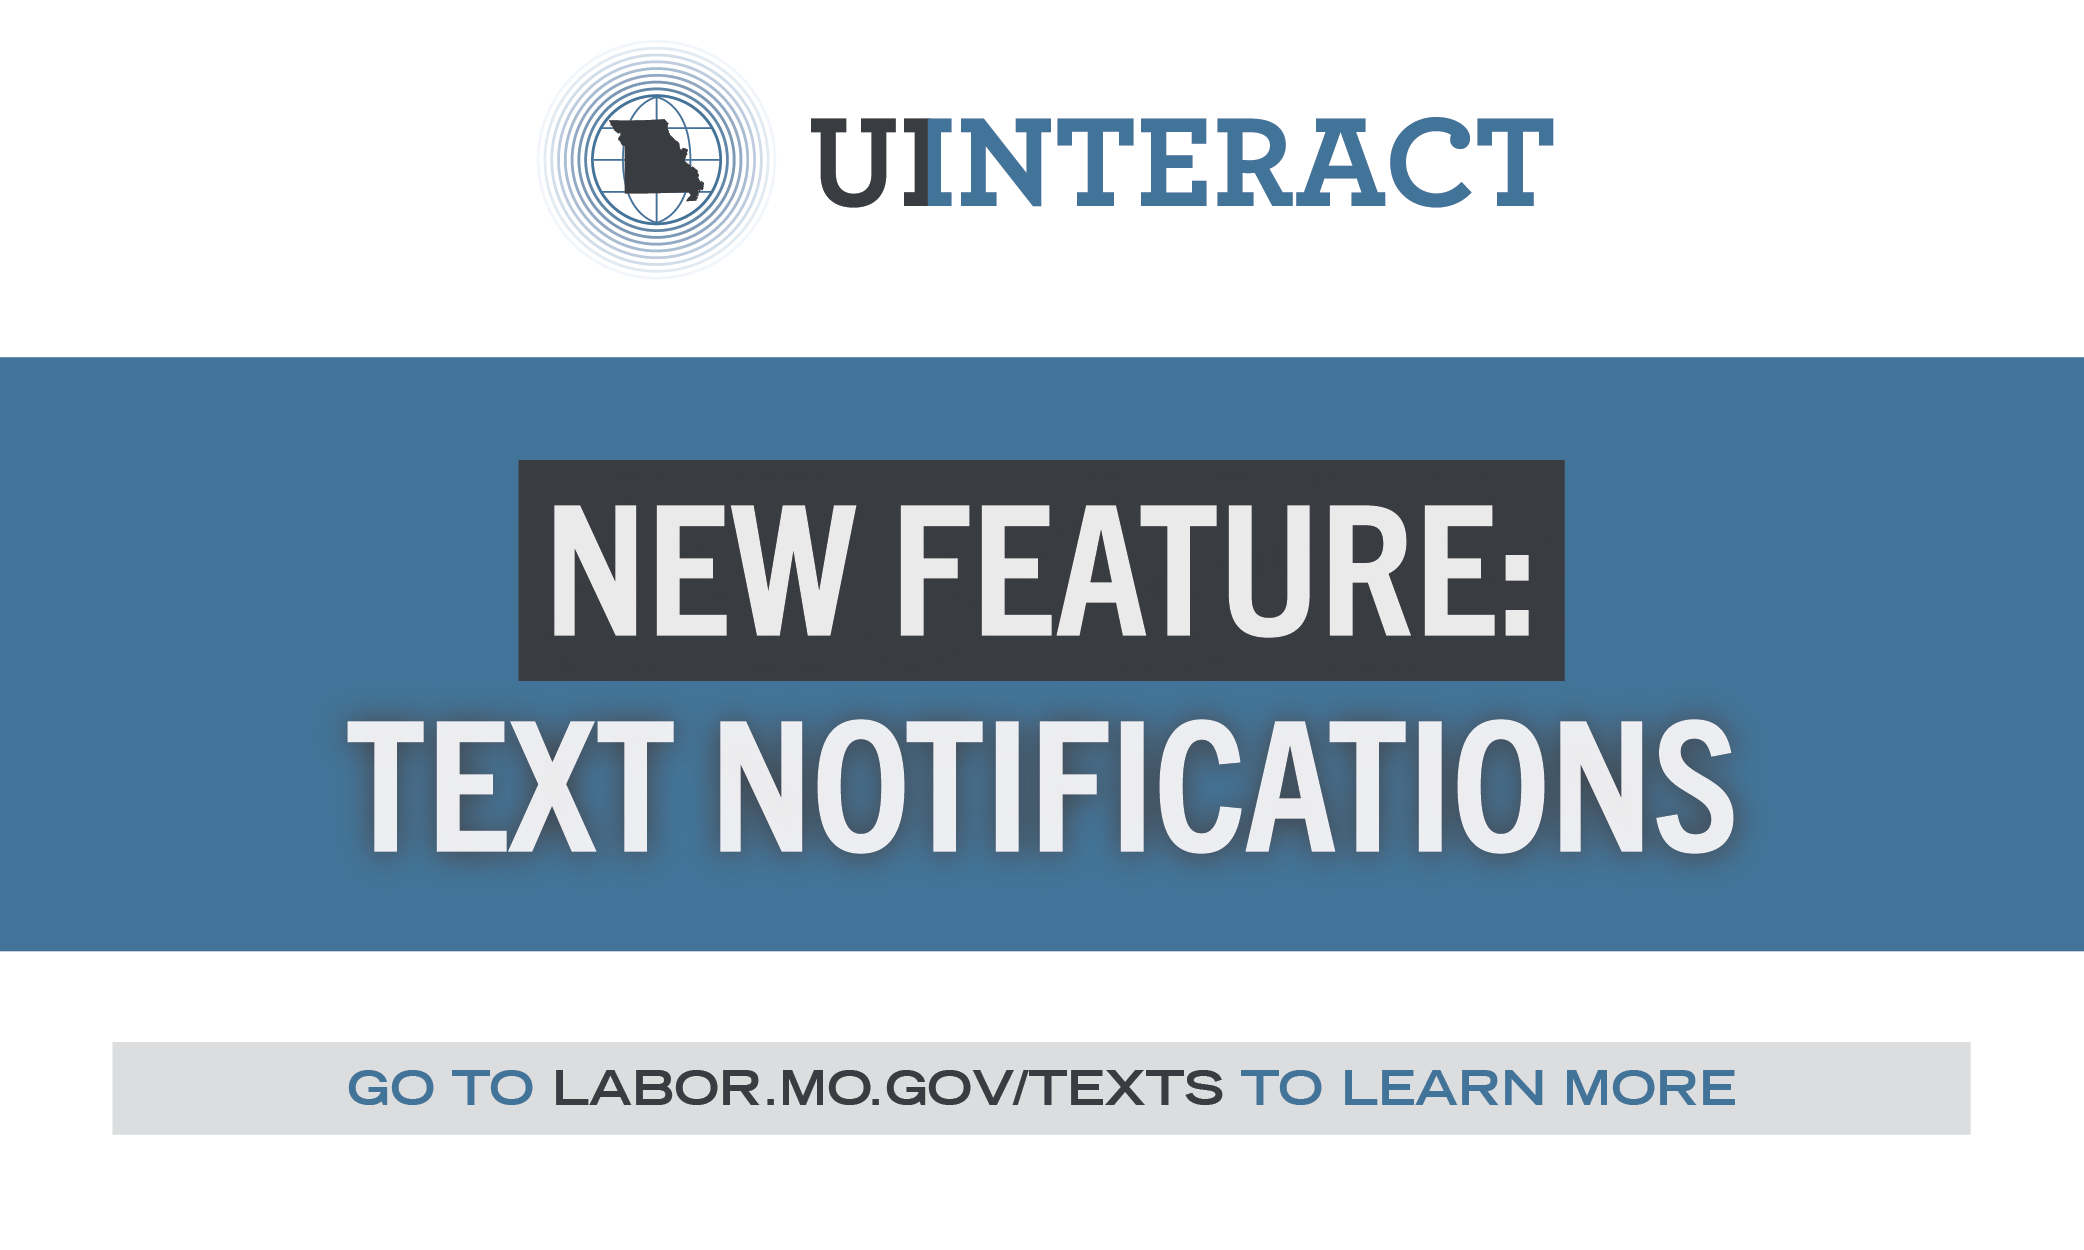 UInteract Text Notifications feature